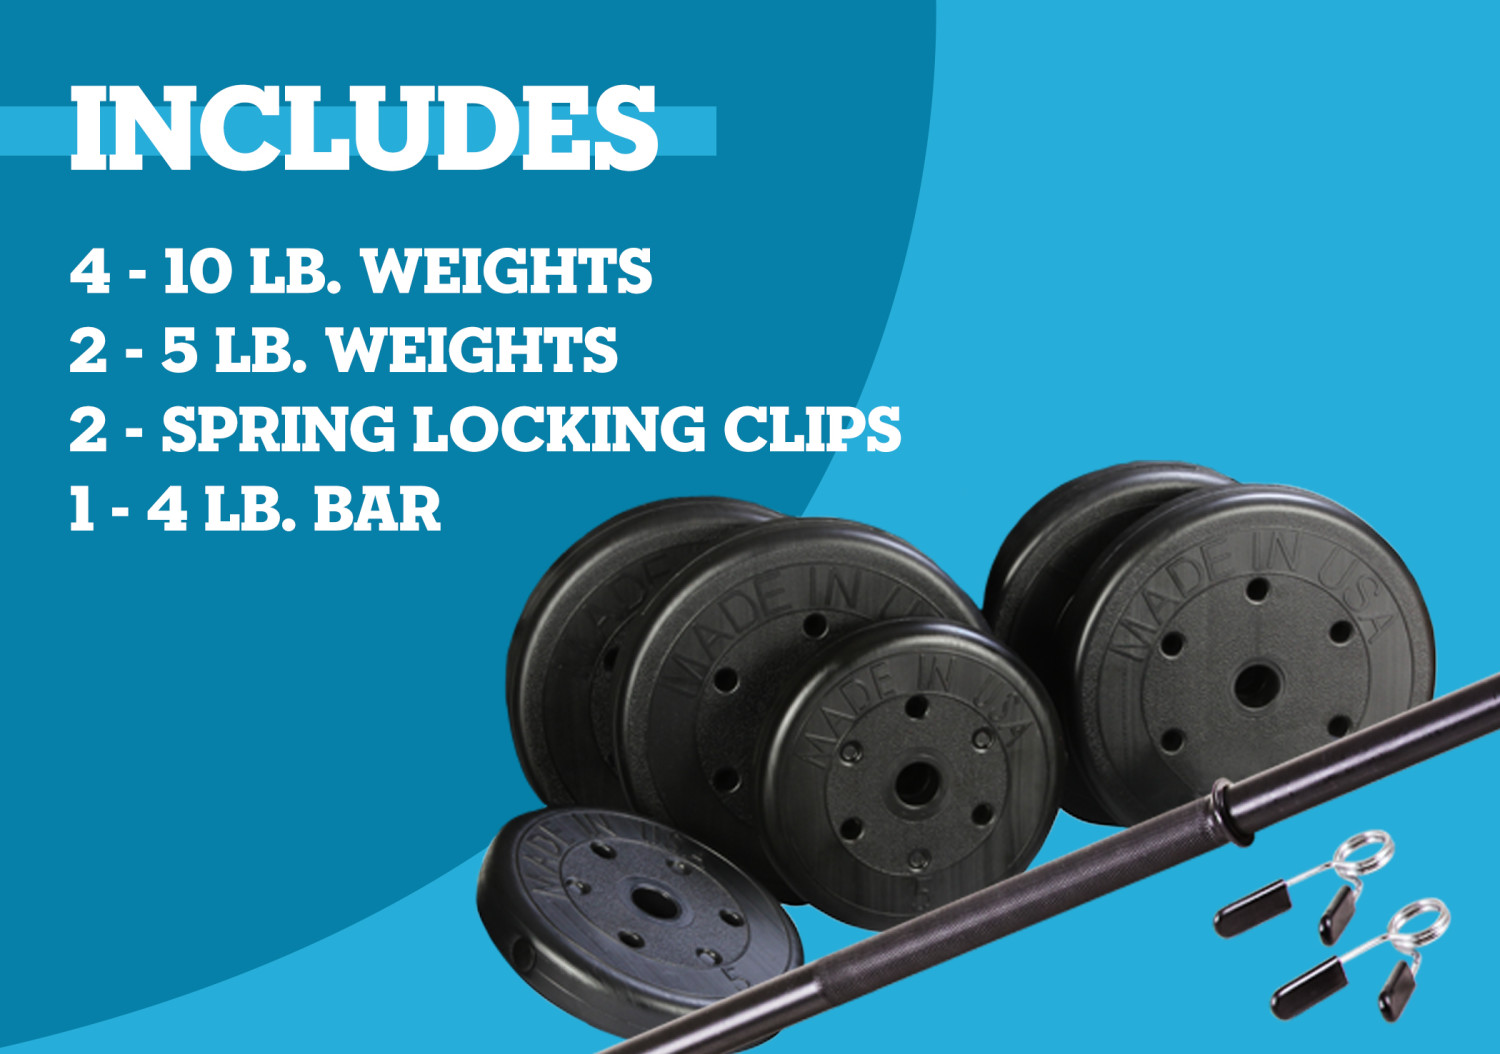 US Weight Duracast 55 lb. Barbell Weight Set with Threaded Barbell Bar, Locking Spring Clips - image 5 of 19